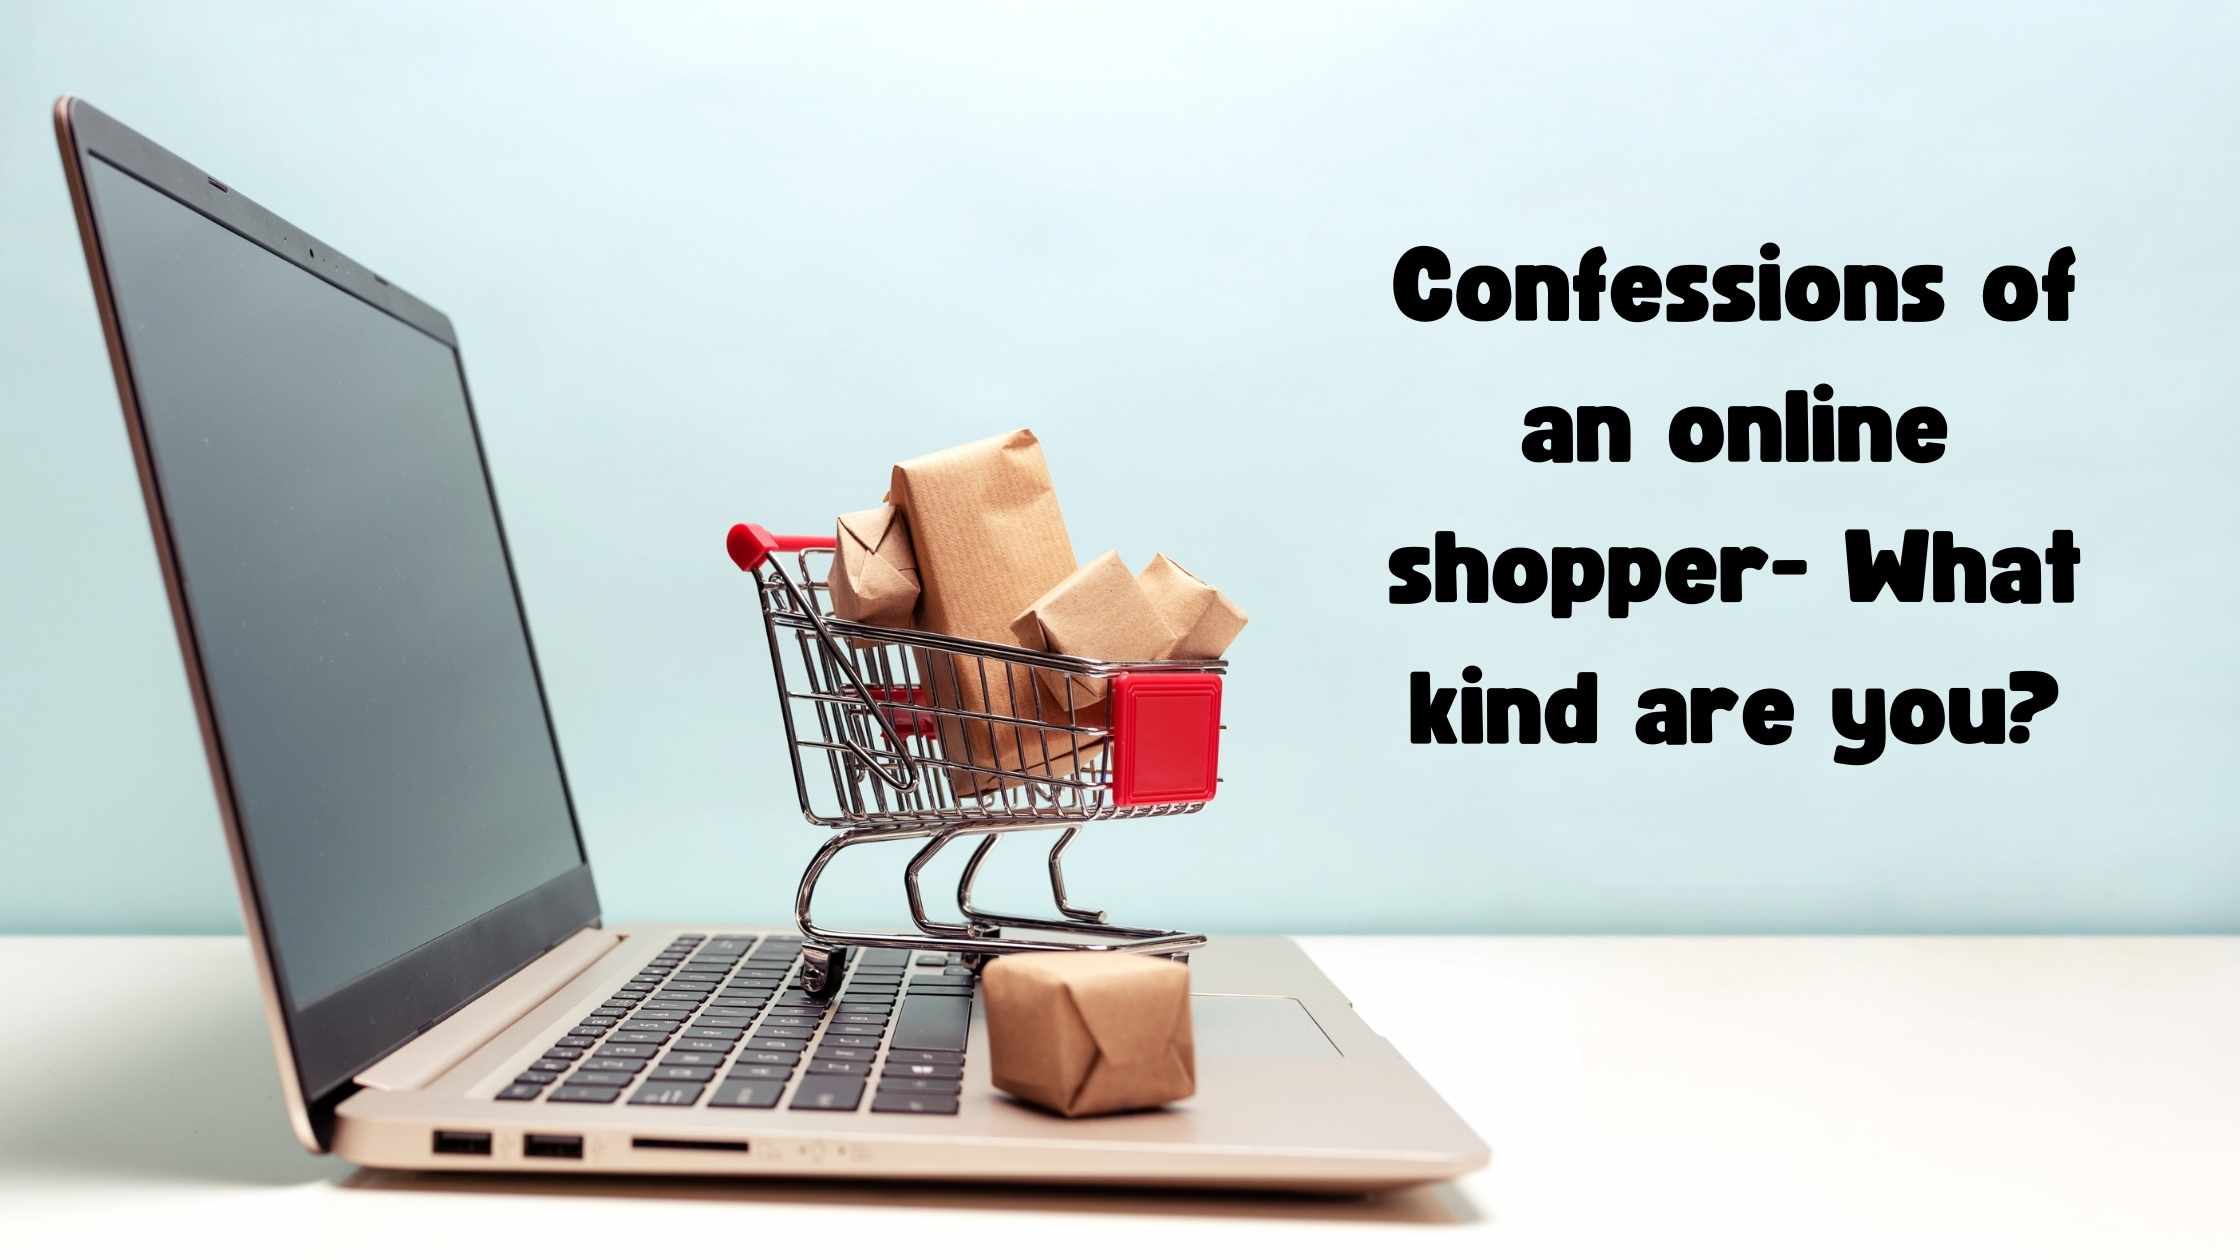 Confessions of an online shopper- What kind are you?